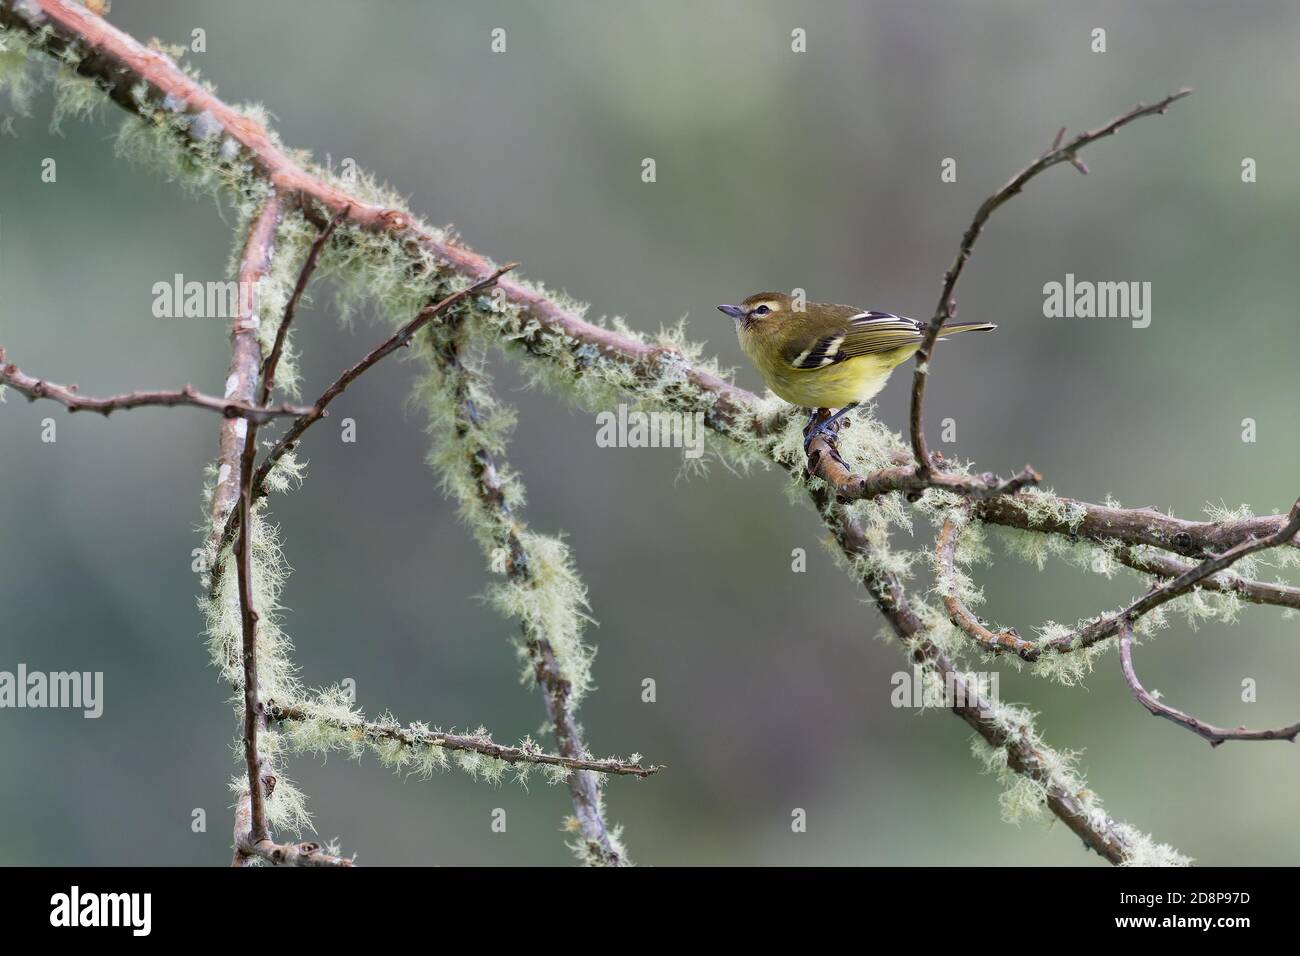 Yellow-winged Vireo - Vireo carmioli small passerine bird. It is endemic to the highlands of Costa Rica and western Panama. Stock Photo